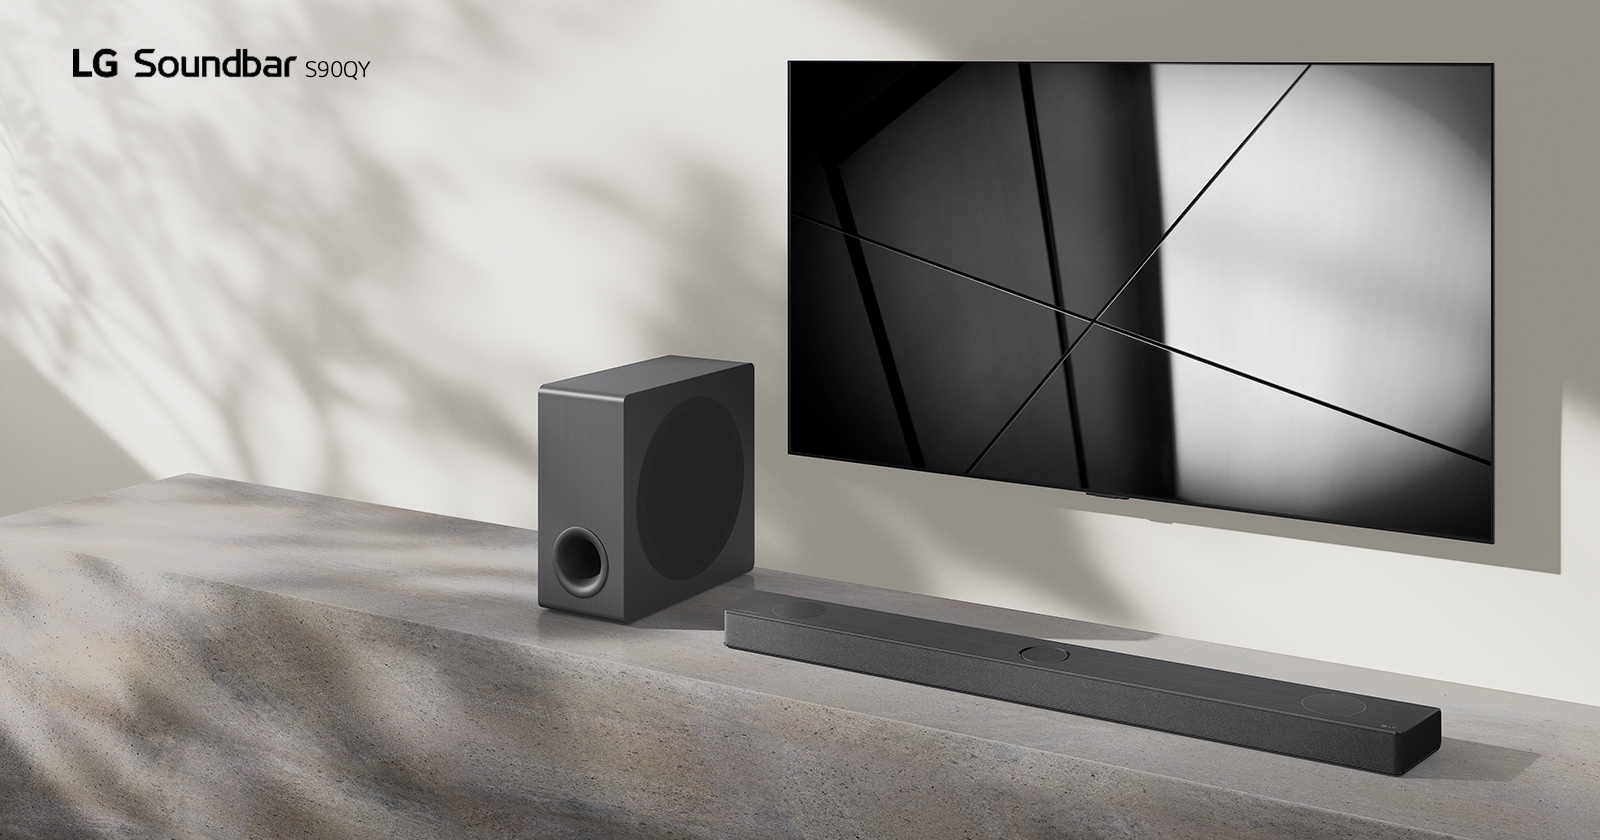 LG sound bar S90QY and LG TV are placed together in the living room. The TV is on, displaying a black and white image.